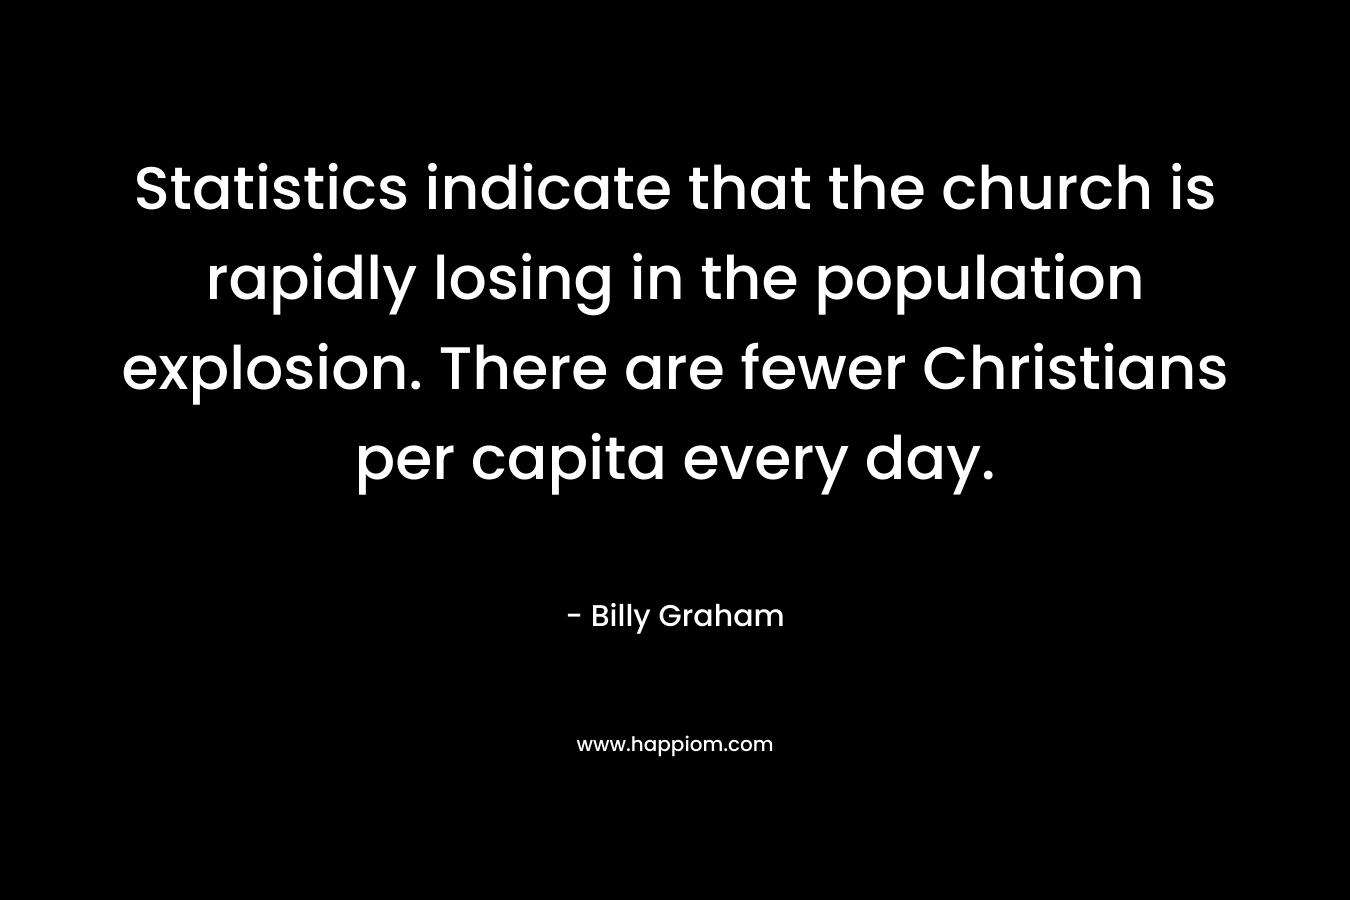 Statistics indicate that the church is rapidly losing in the population explosion. There are fewer Christians per capita every day. – Billy Graham